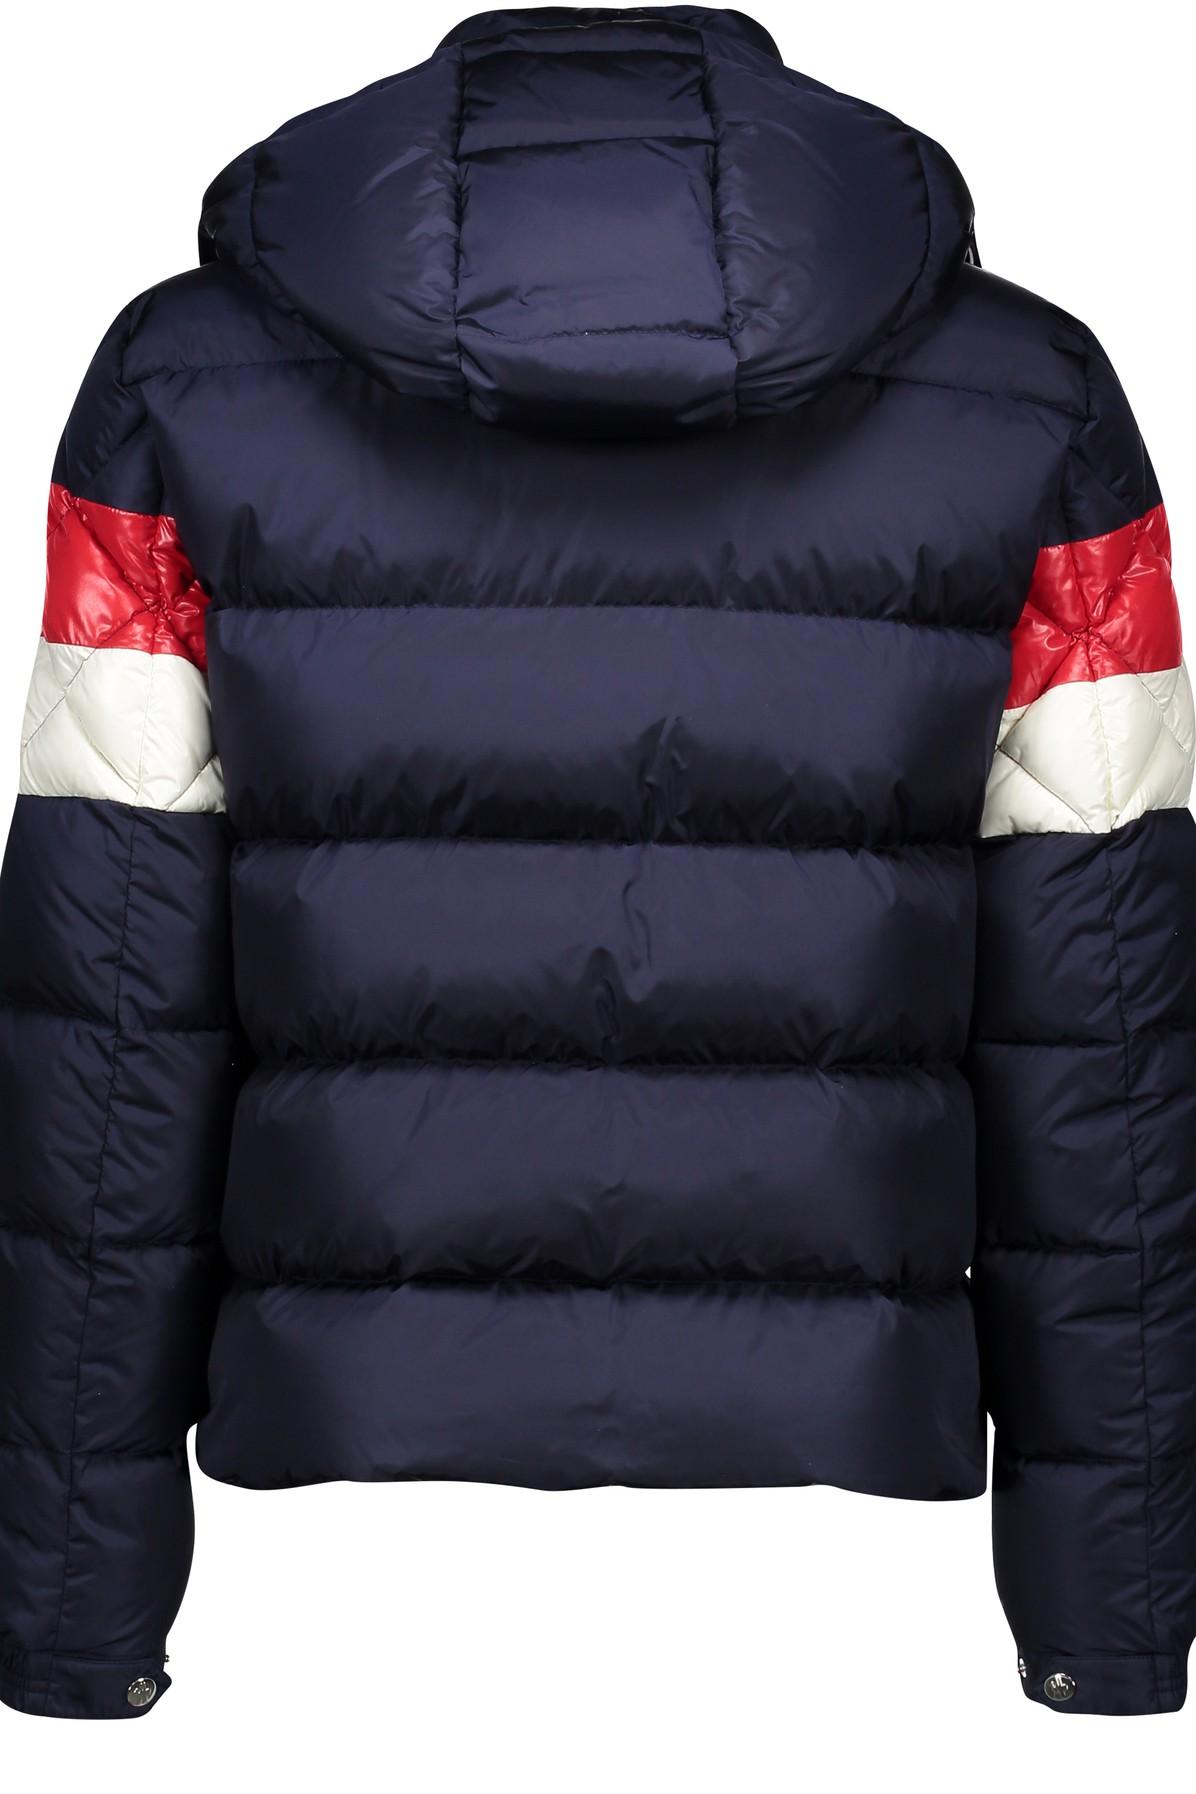 Moncler Synthetic Janvry Jacket in White/Navy/Red (Blue) for Men | Lyst